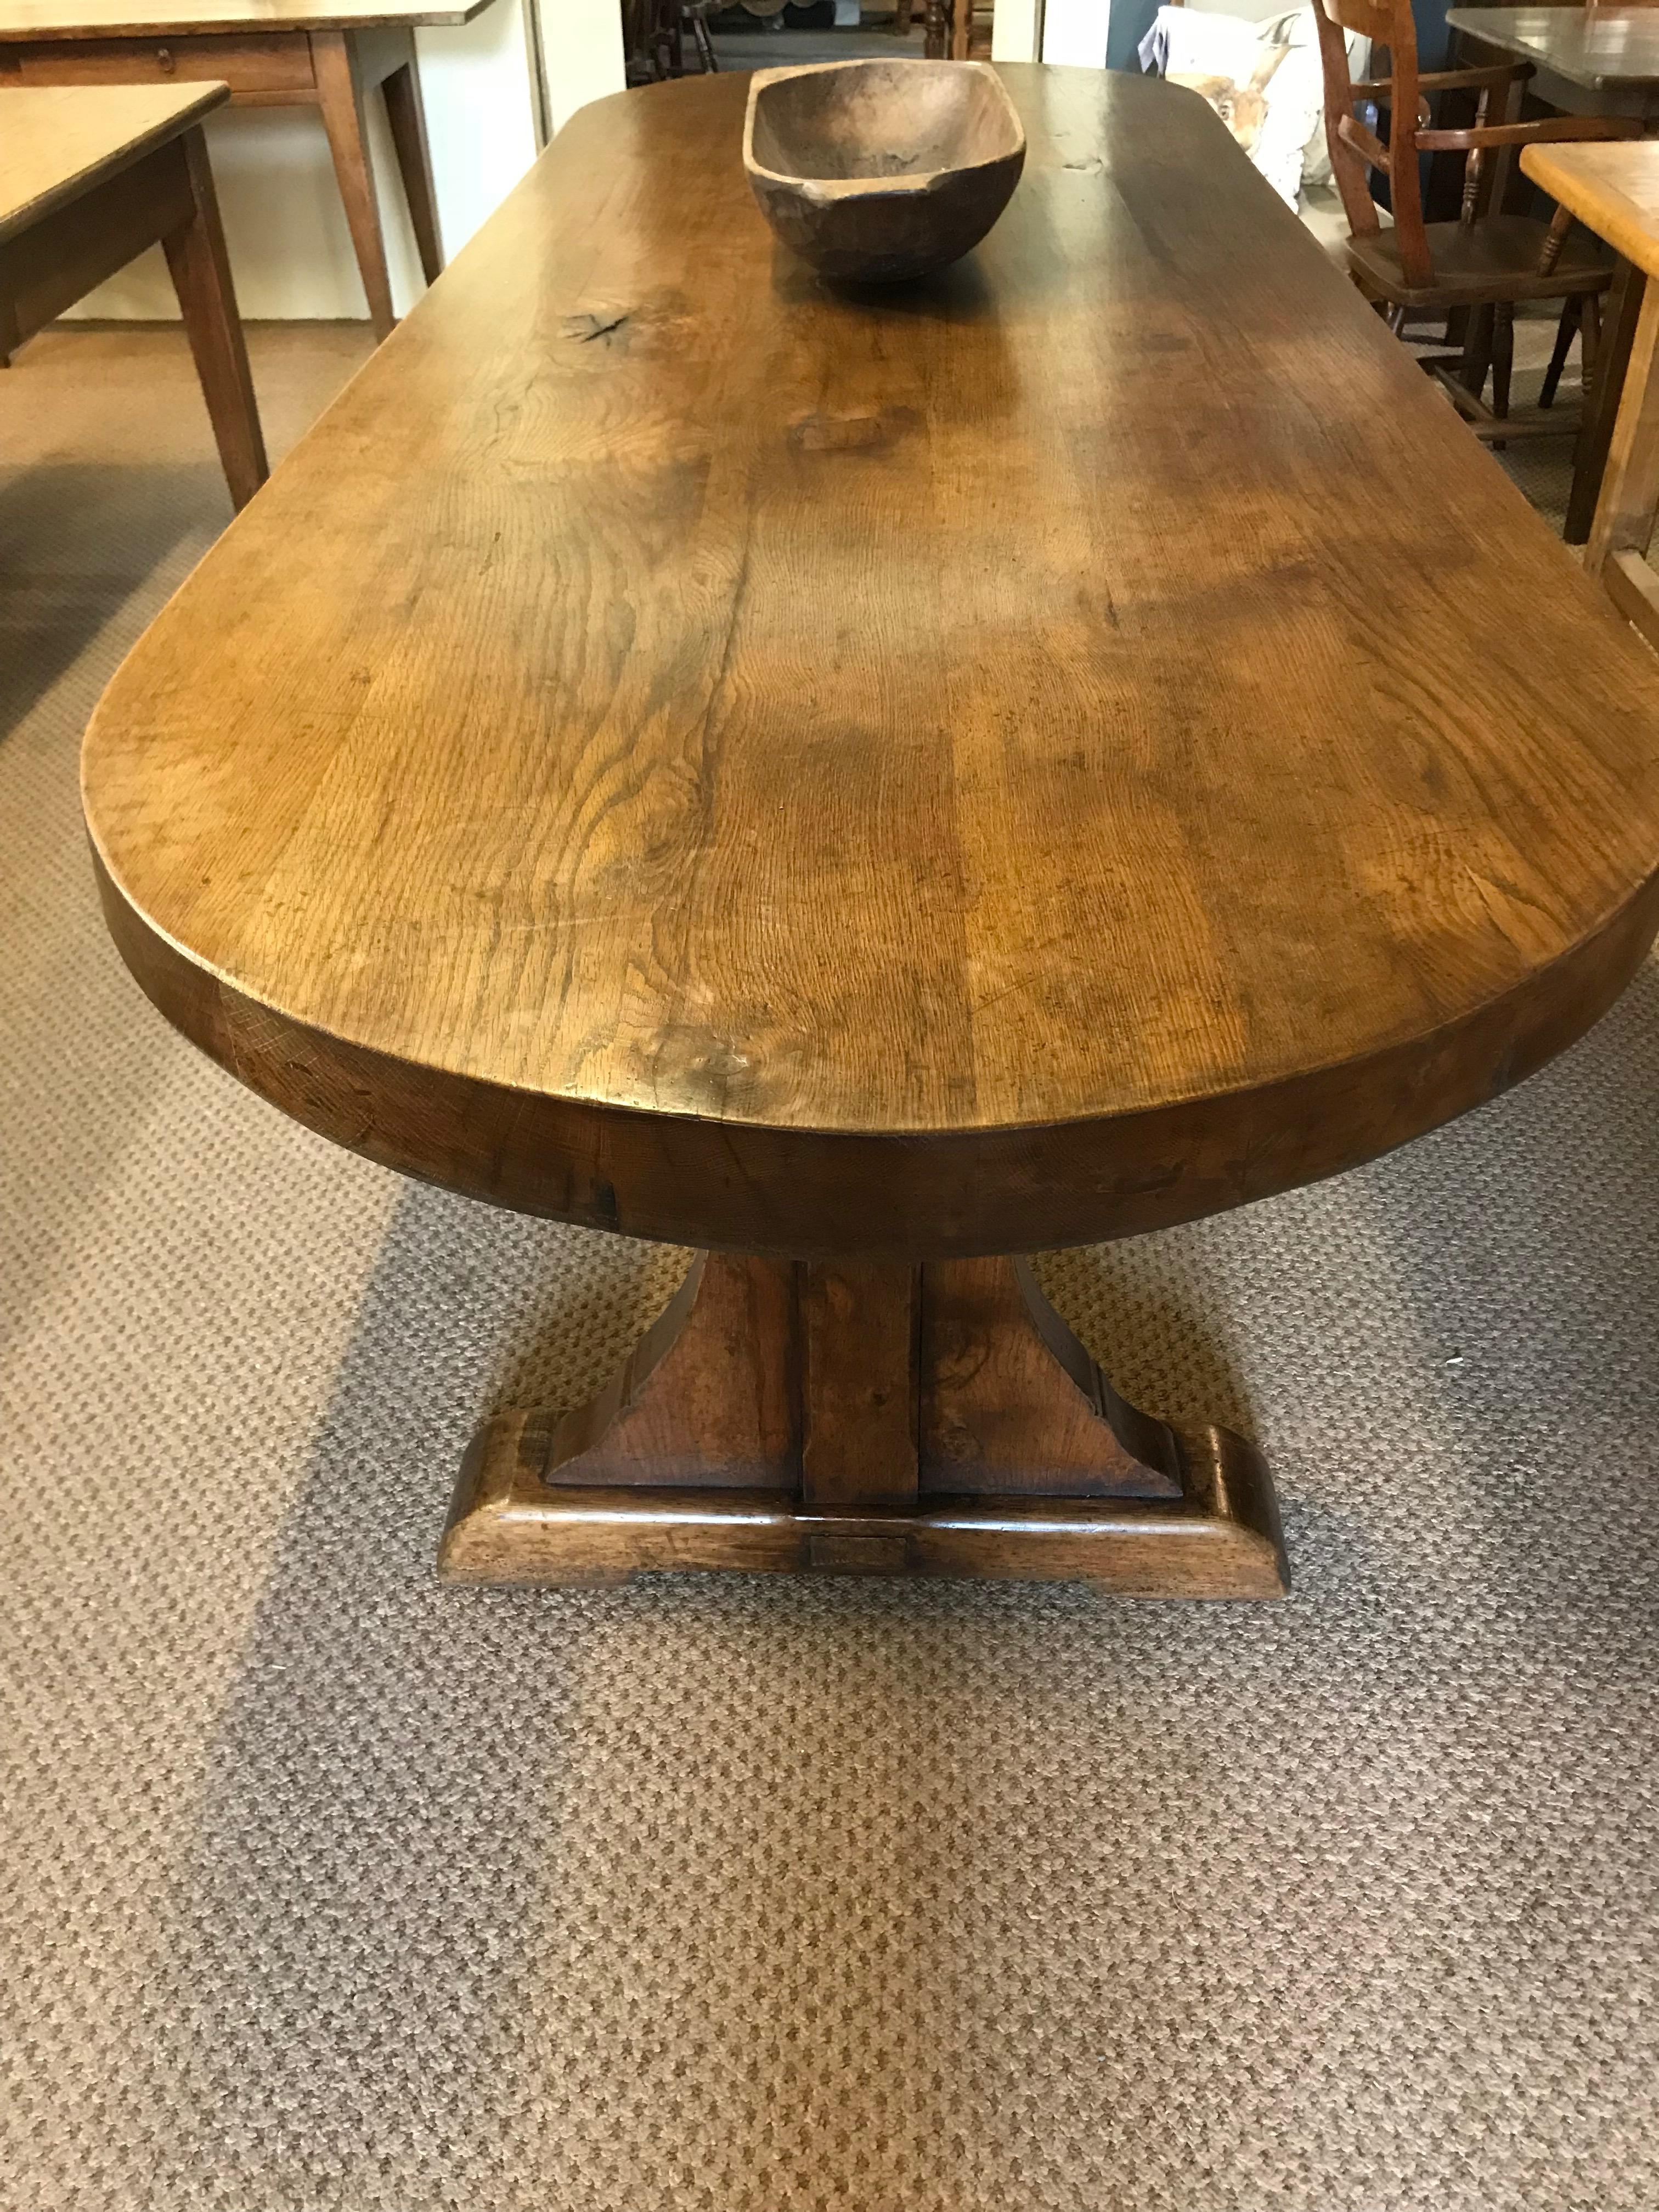 Large antique oval oak 19th century table with wonderful thick top, the table stands on two like trestle legs supported by a centre stretcher. The table is absolutely stunning with color and proportions to make it stand out from any crowd.

Oval